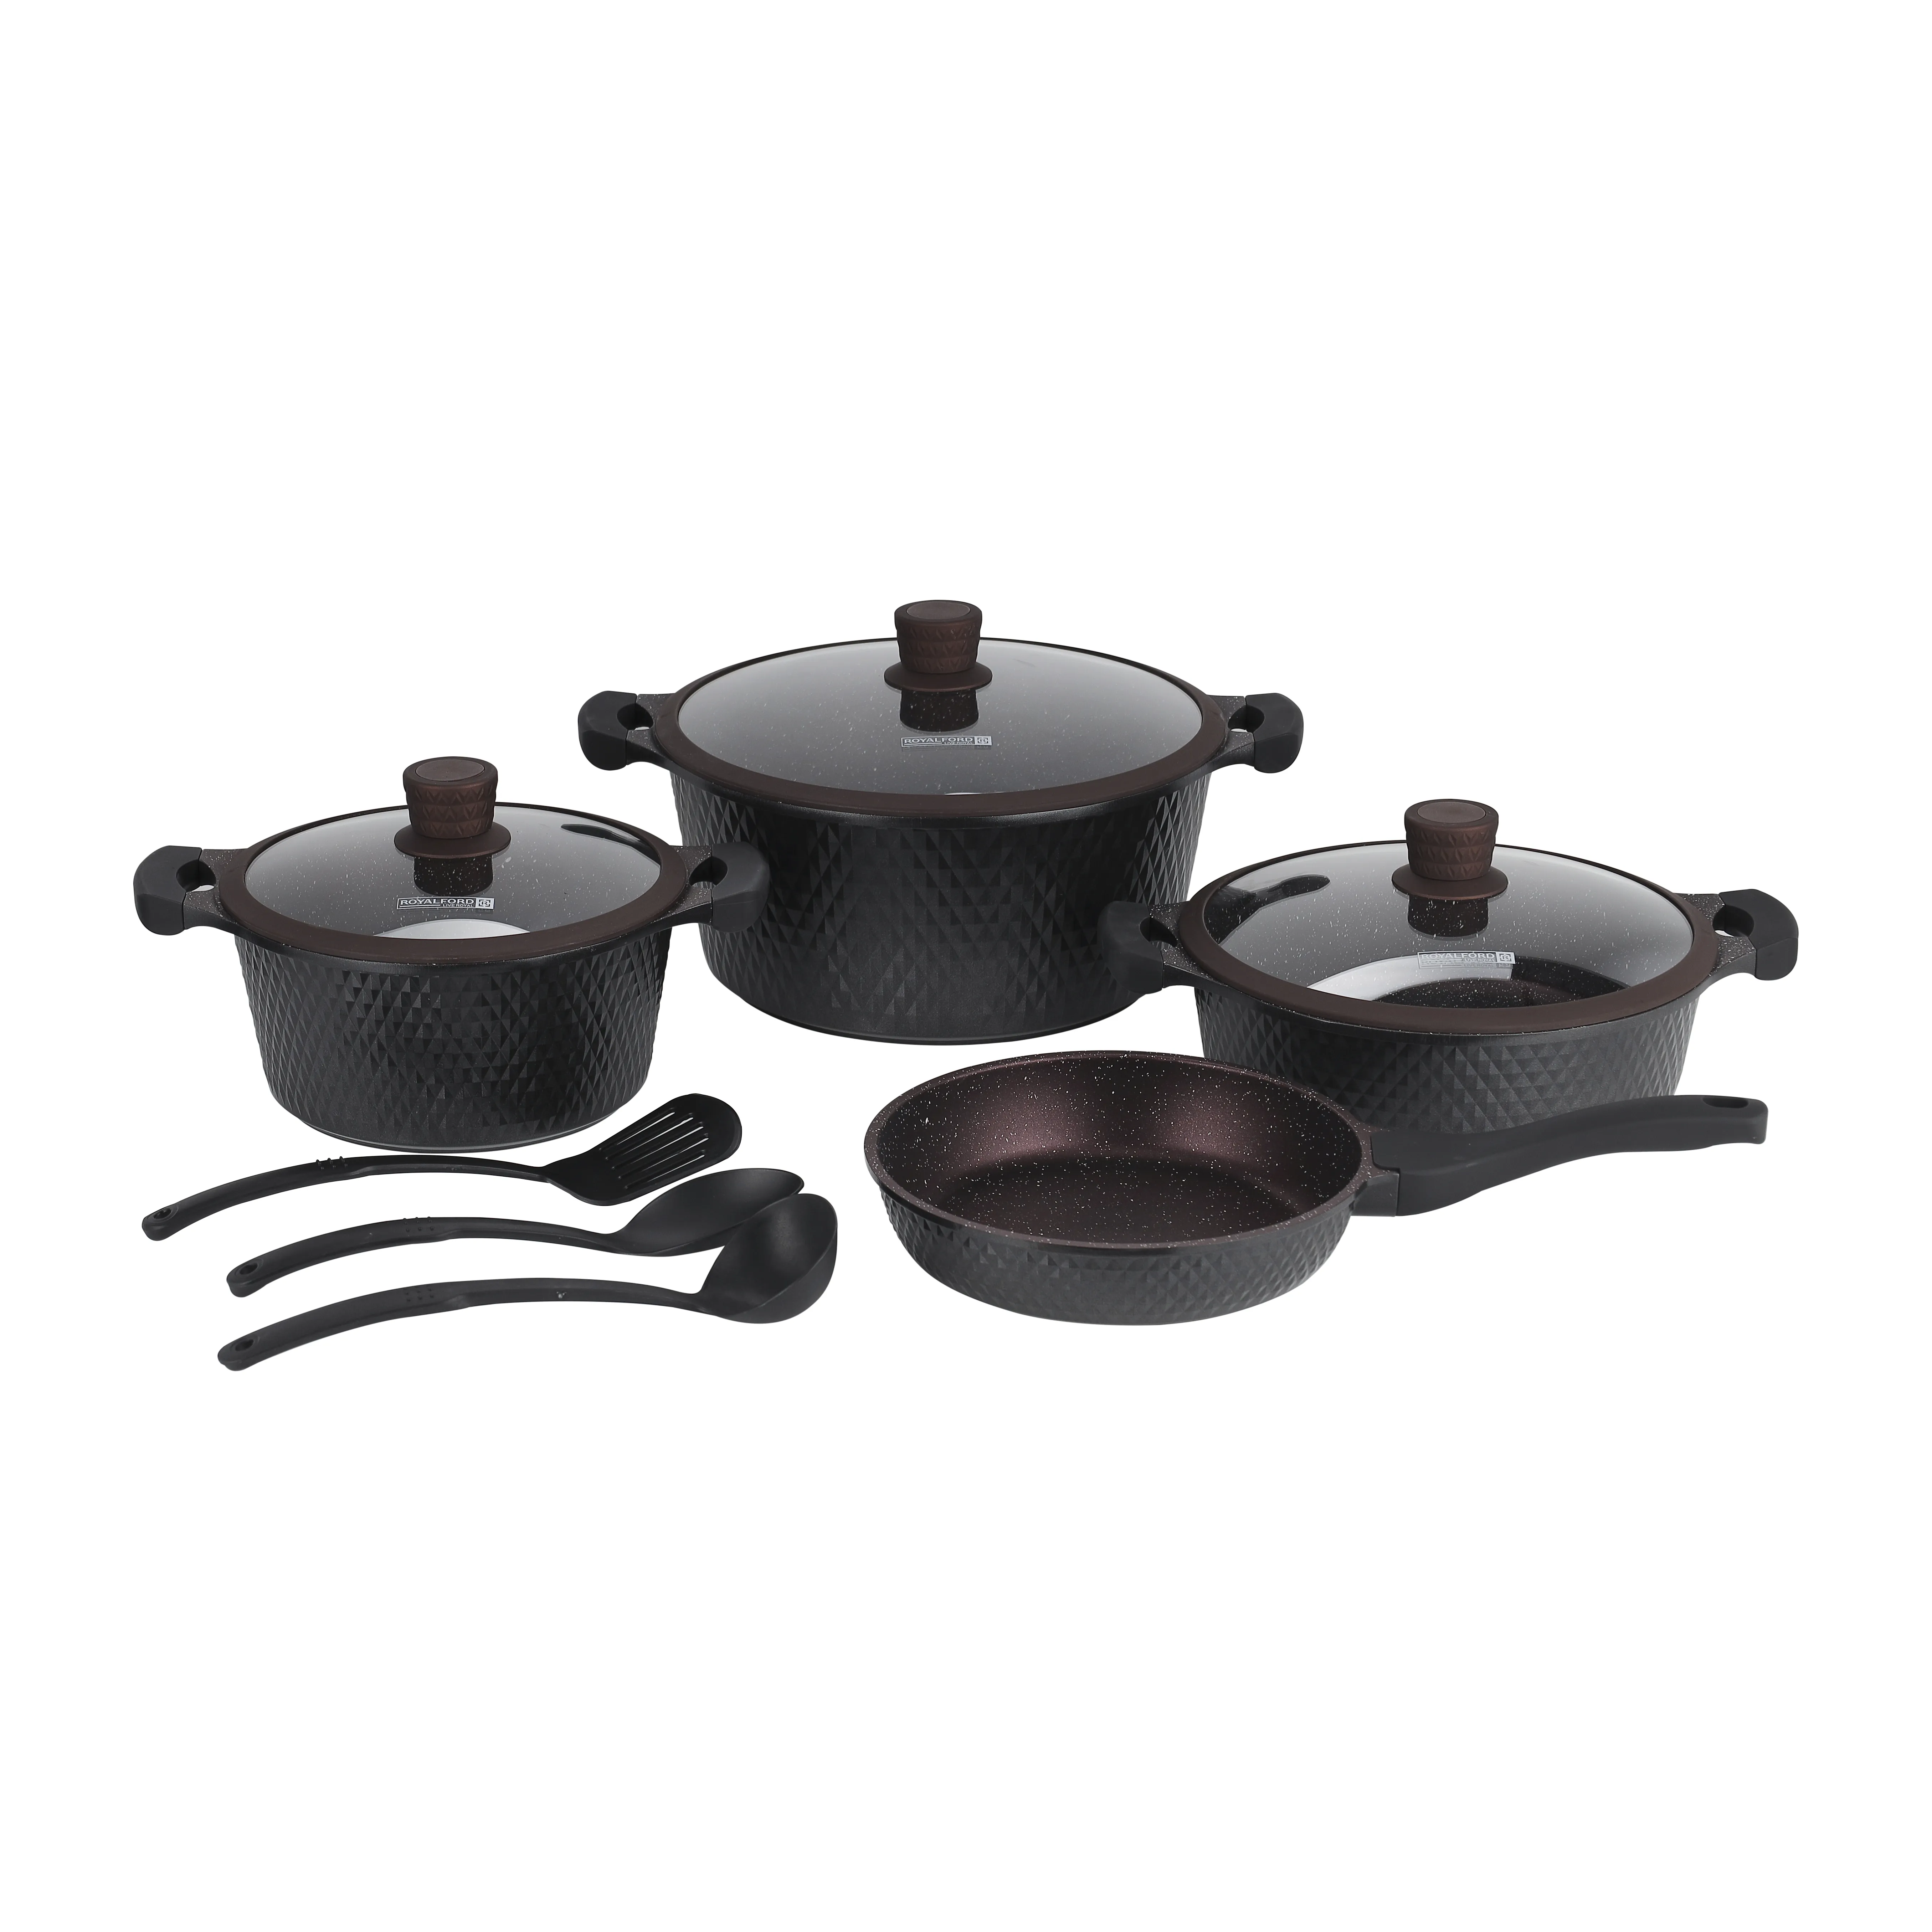 Royalford Die-Cast Cookware Set with Durable Granite Coating, RF10336 10 Pcs Cookware Tempered Glass Lid Heavy-Duty Bakelite Handles Compatible with Multiple Hob